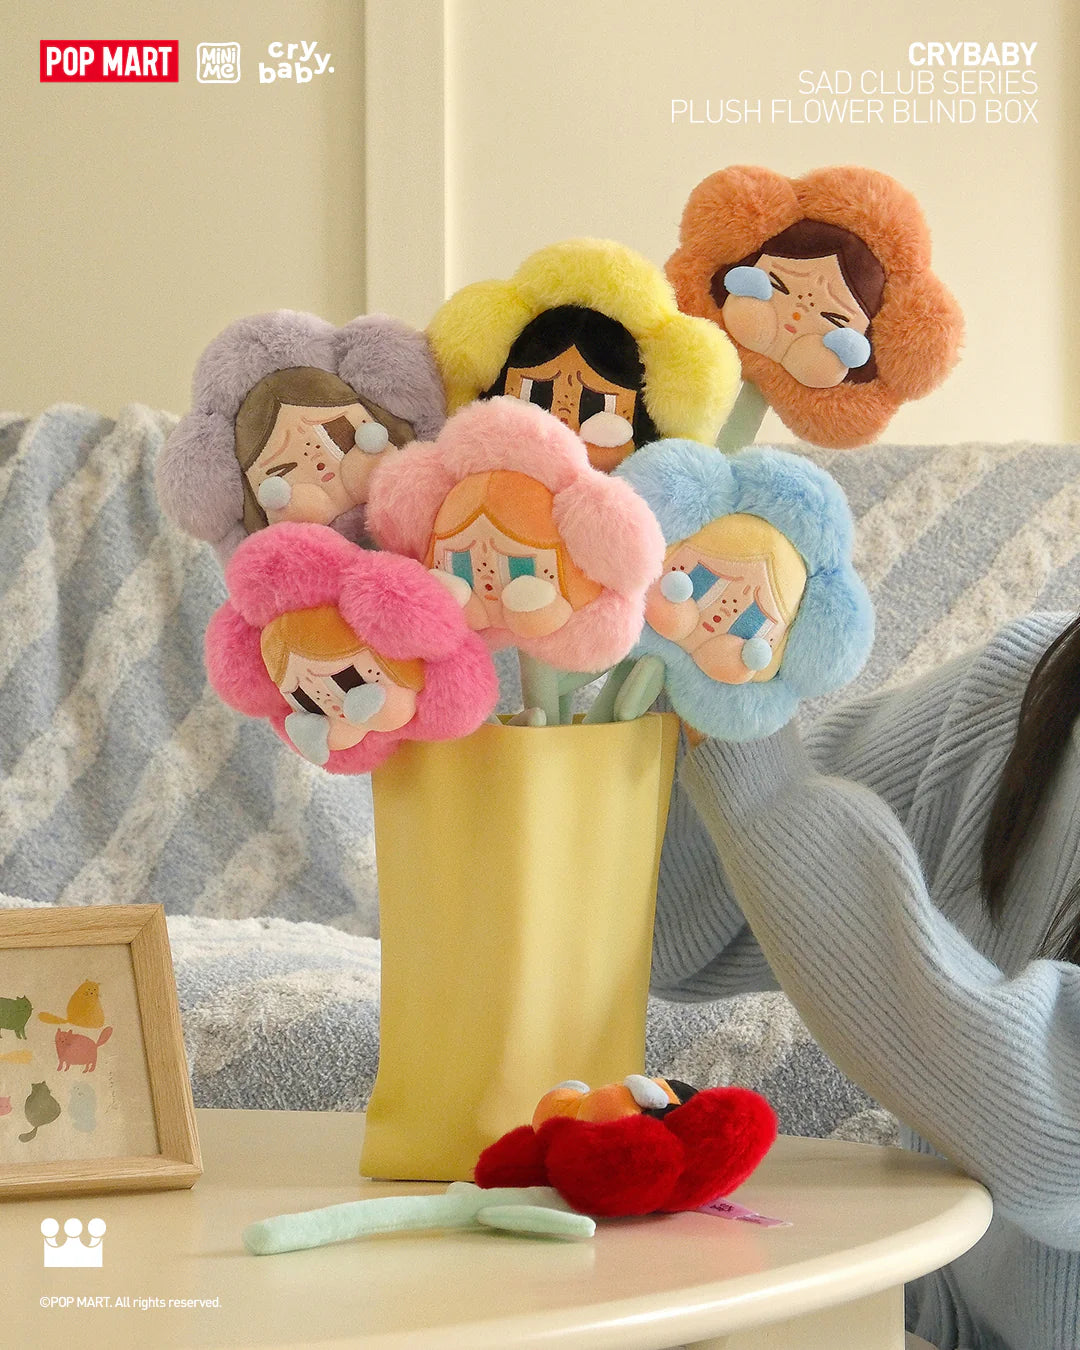 A vase filled with various plush toys from the CRYBABY Sad Club Series-Plush Flower Blind Box Series.